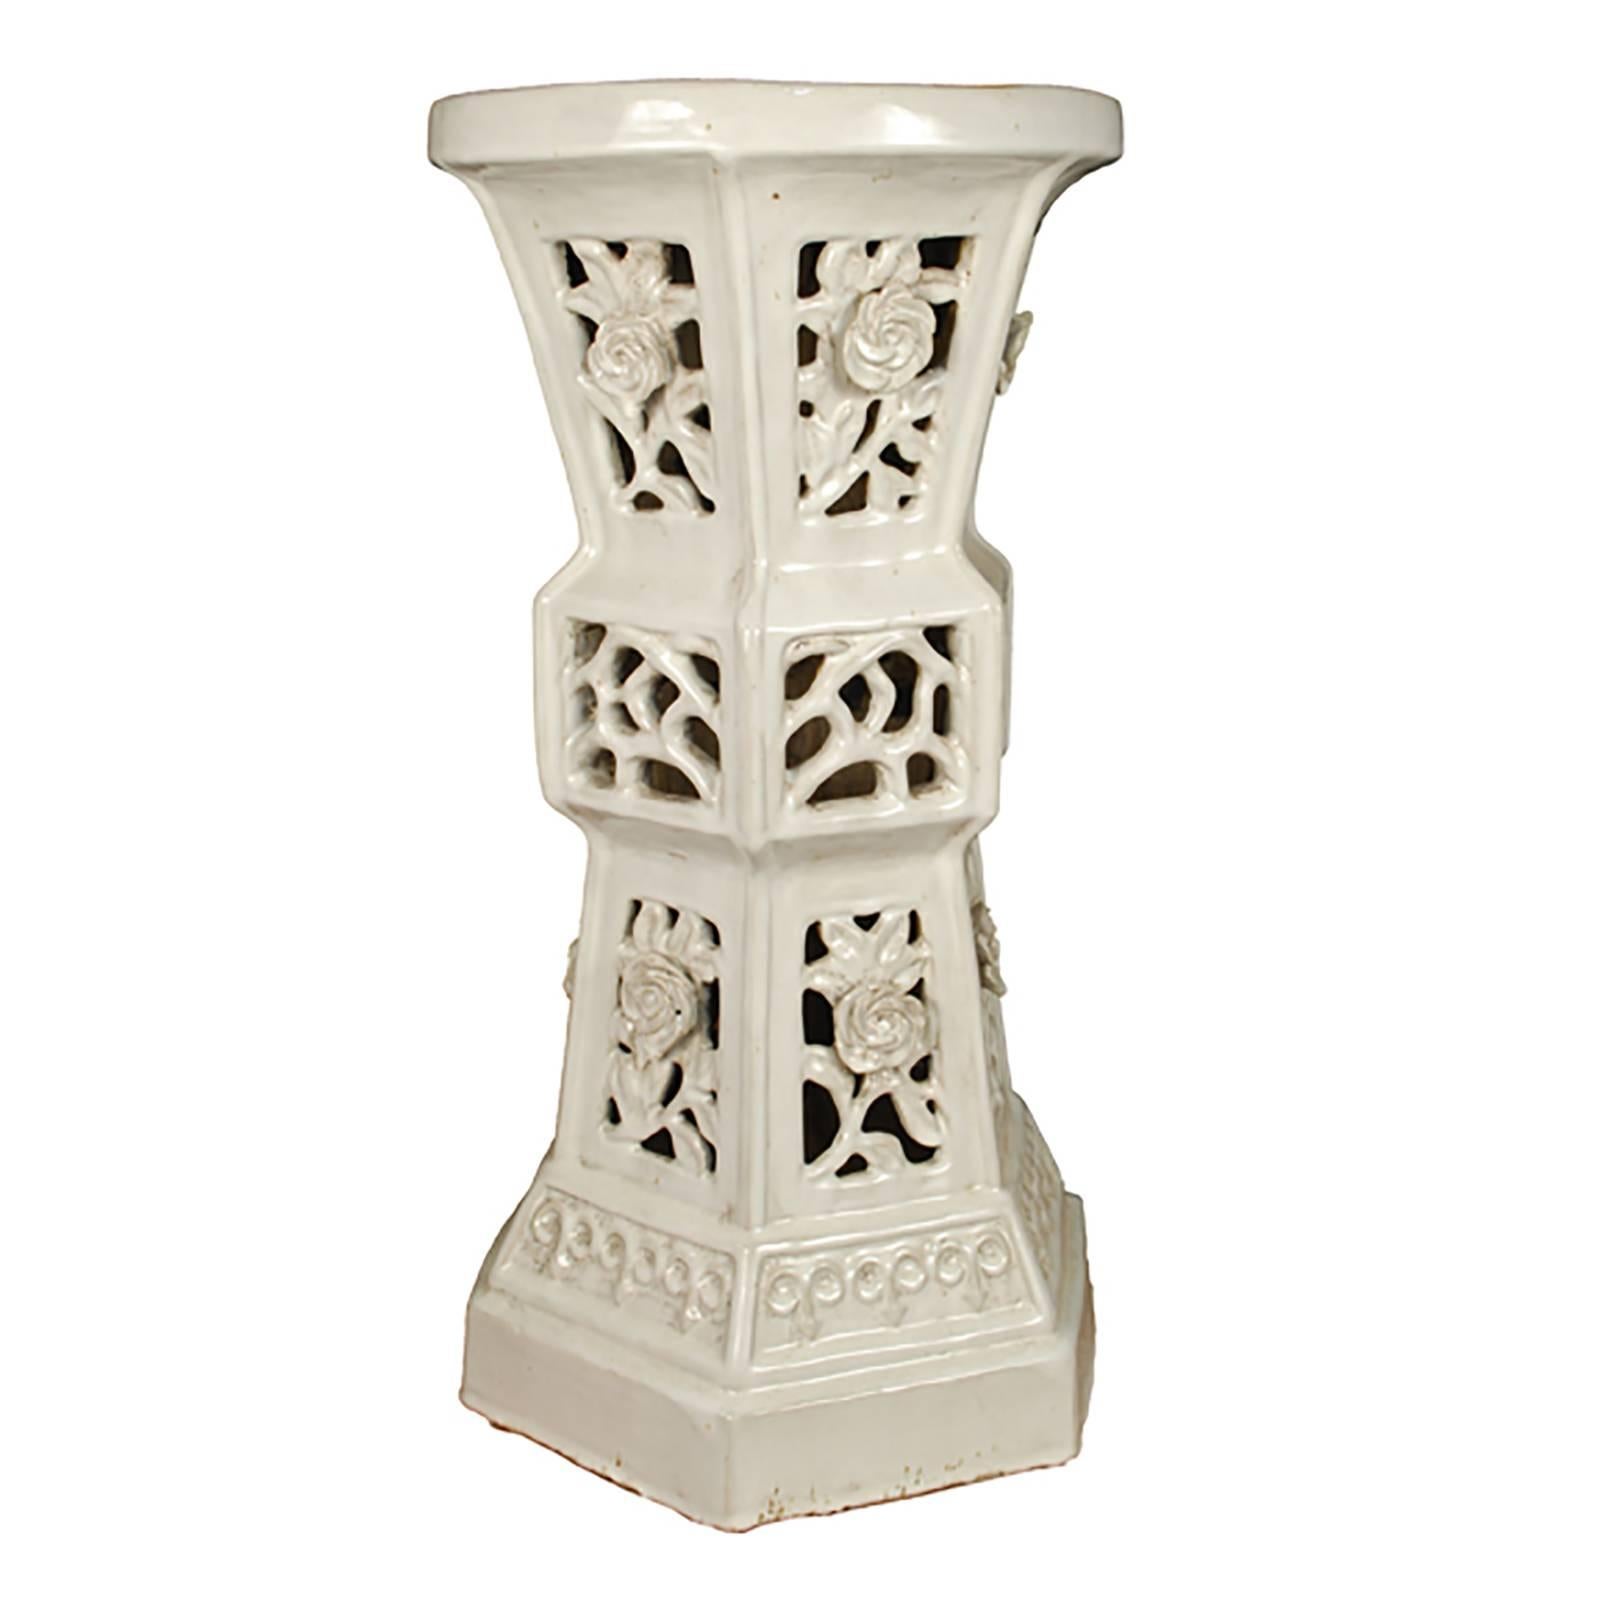 This unusual early 20th century white glazed ceramic pedestal was made by an artisan in Southern China and features an hourglass form and floral cut-outs. It's height indicates it was likely used in a garden for incense, tea or plants but, today,